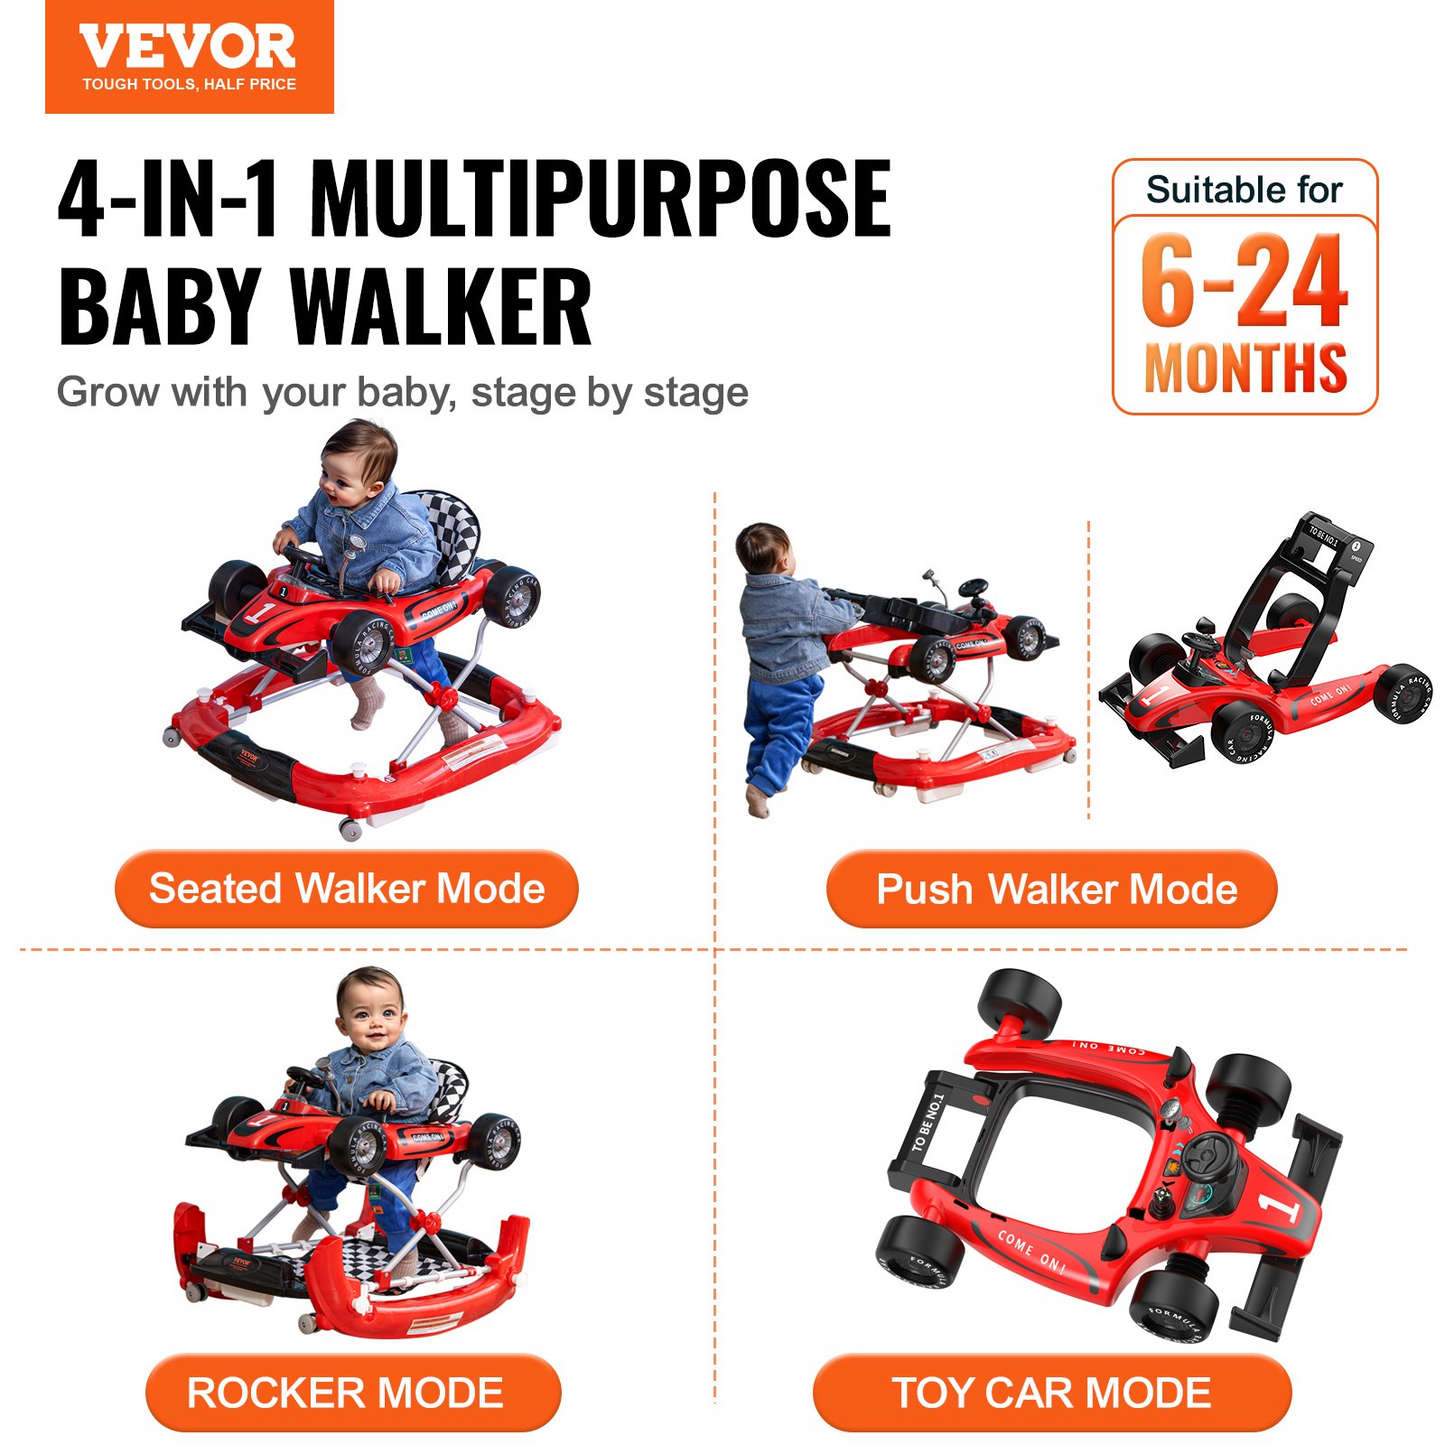 VEVOR 4-in-1 Baby Walker, Foldable Baby Activity Center on Wheels, Adjustable Height, Light, Steering Wheel, Toy Car | Learning-Seated | Walk-Behind | Rocker Toddler Walker for 6-24 Month Boys Girls, Goodies N Stuff